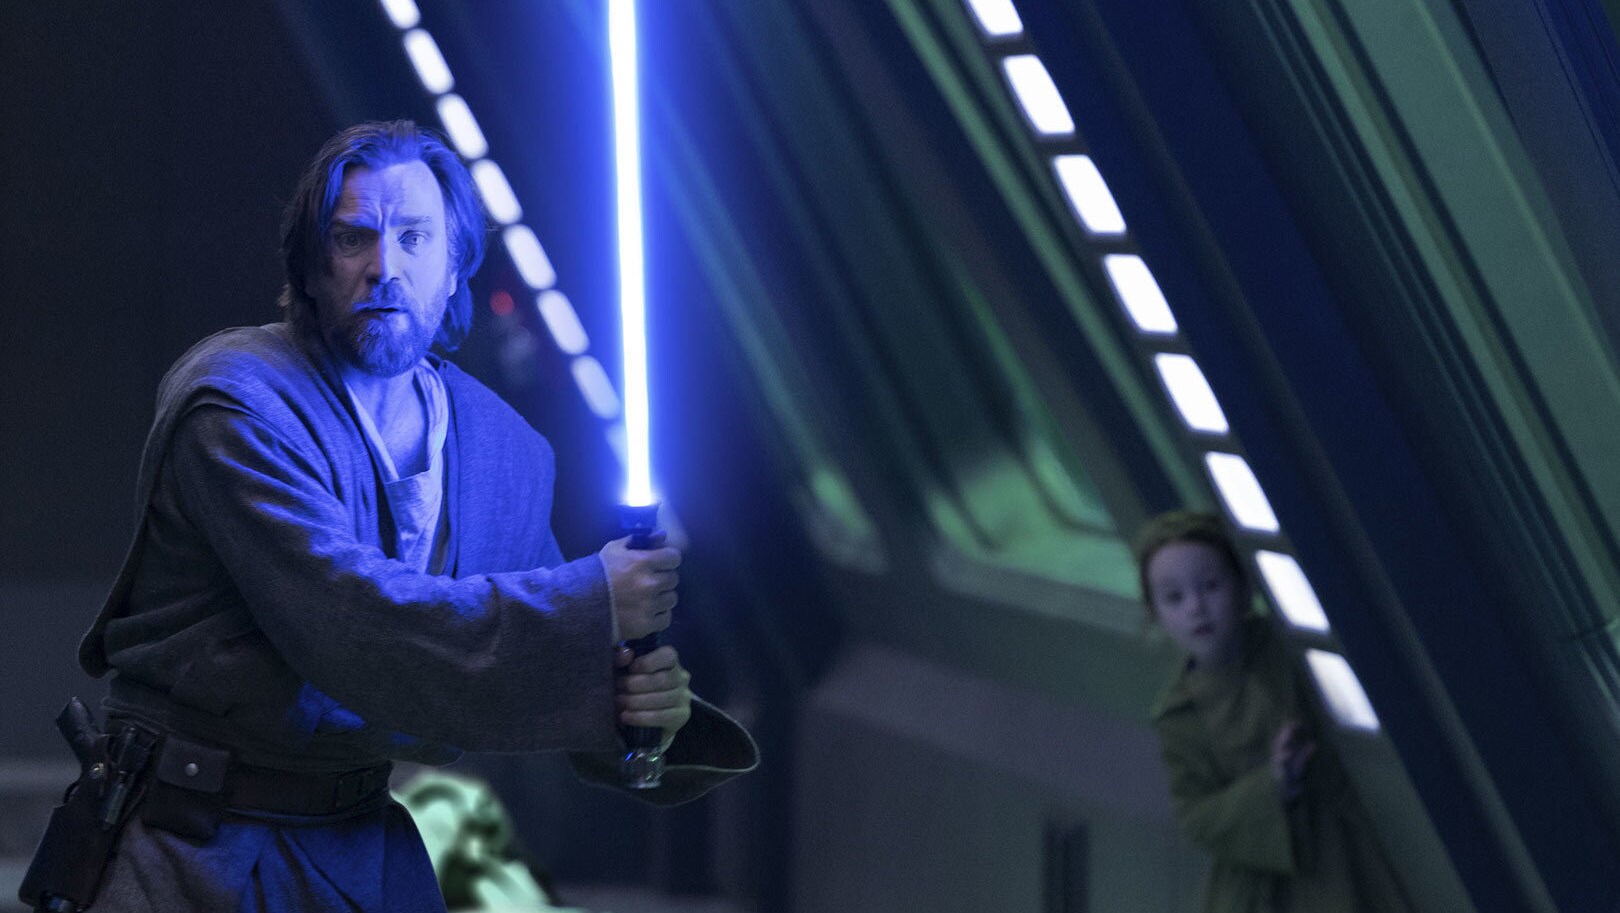 Lightsaber in hand, Obi-Wan protects Leia as they head for an exit.